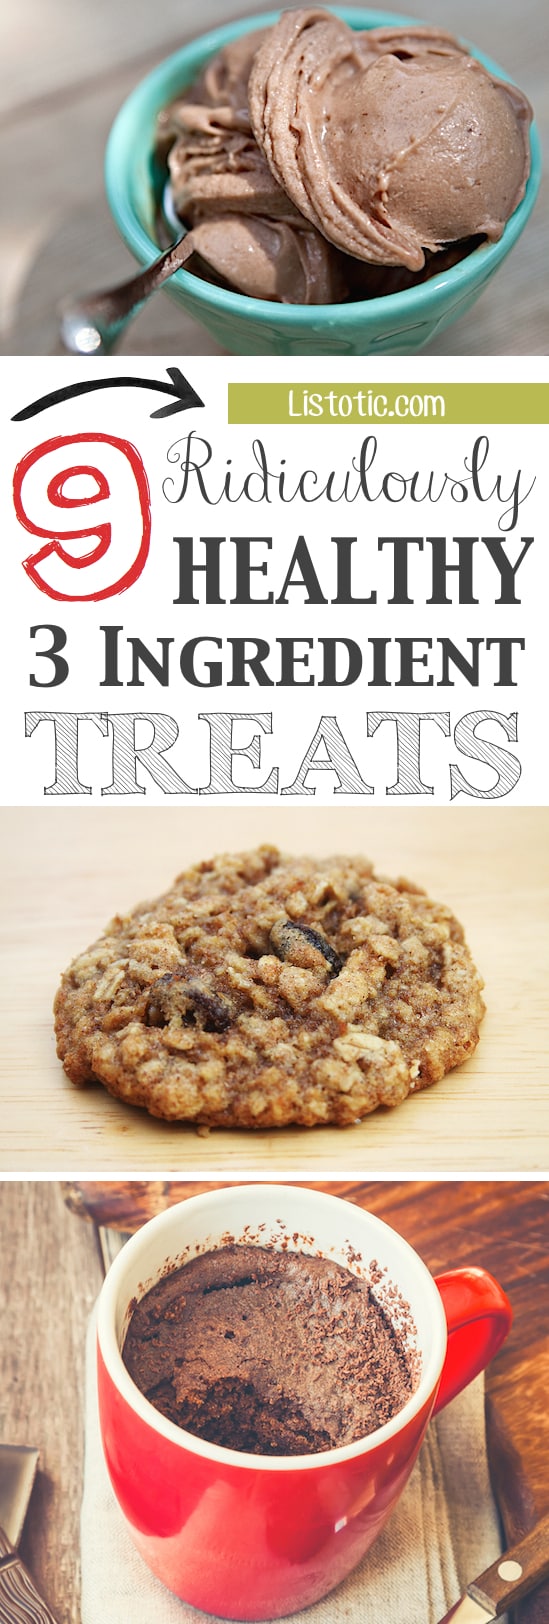 Quick, easy and healthy 3 ingredient snacks for kids, teens and adults! The perfect guilt-free treats and desserts! These recipes are perfect for weight loss and health. Listotic.com 